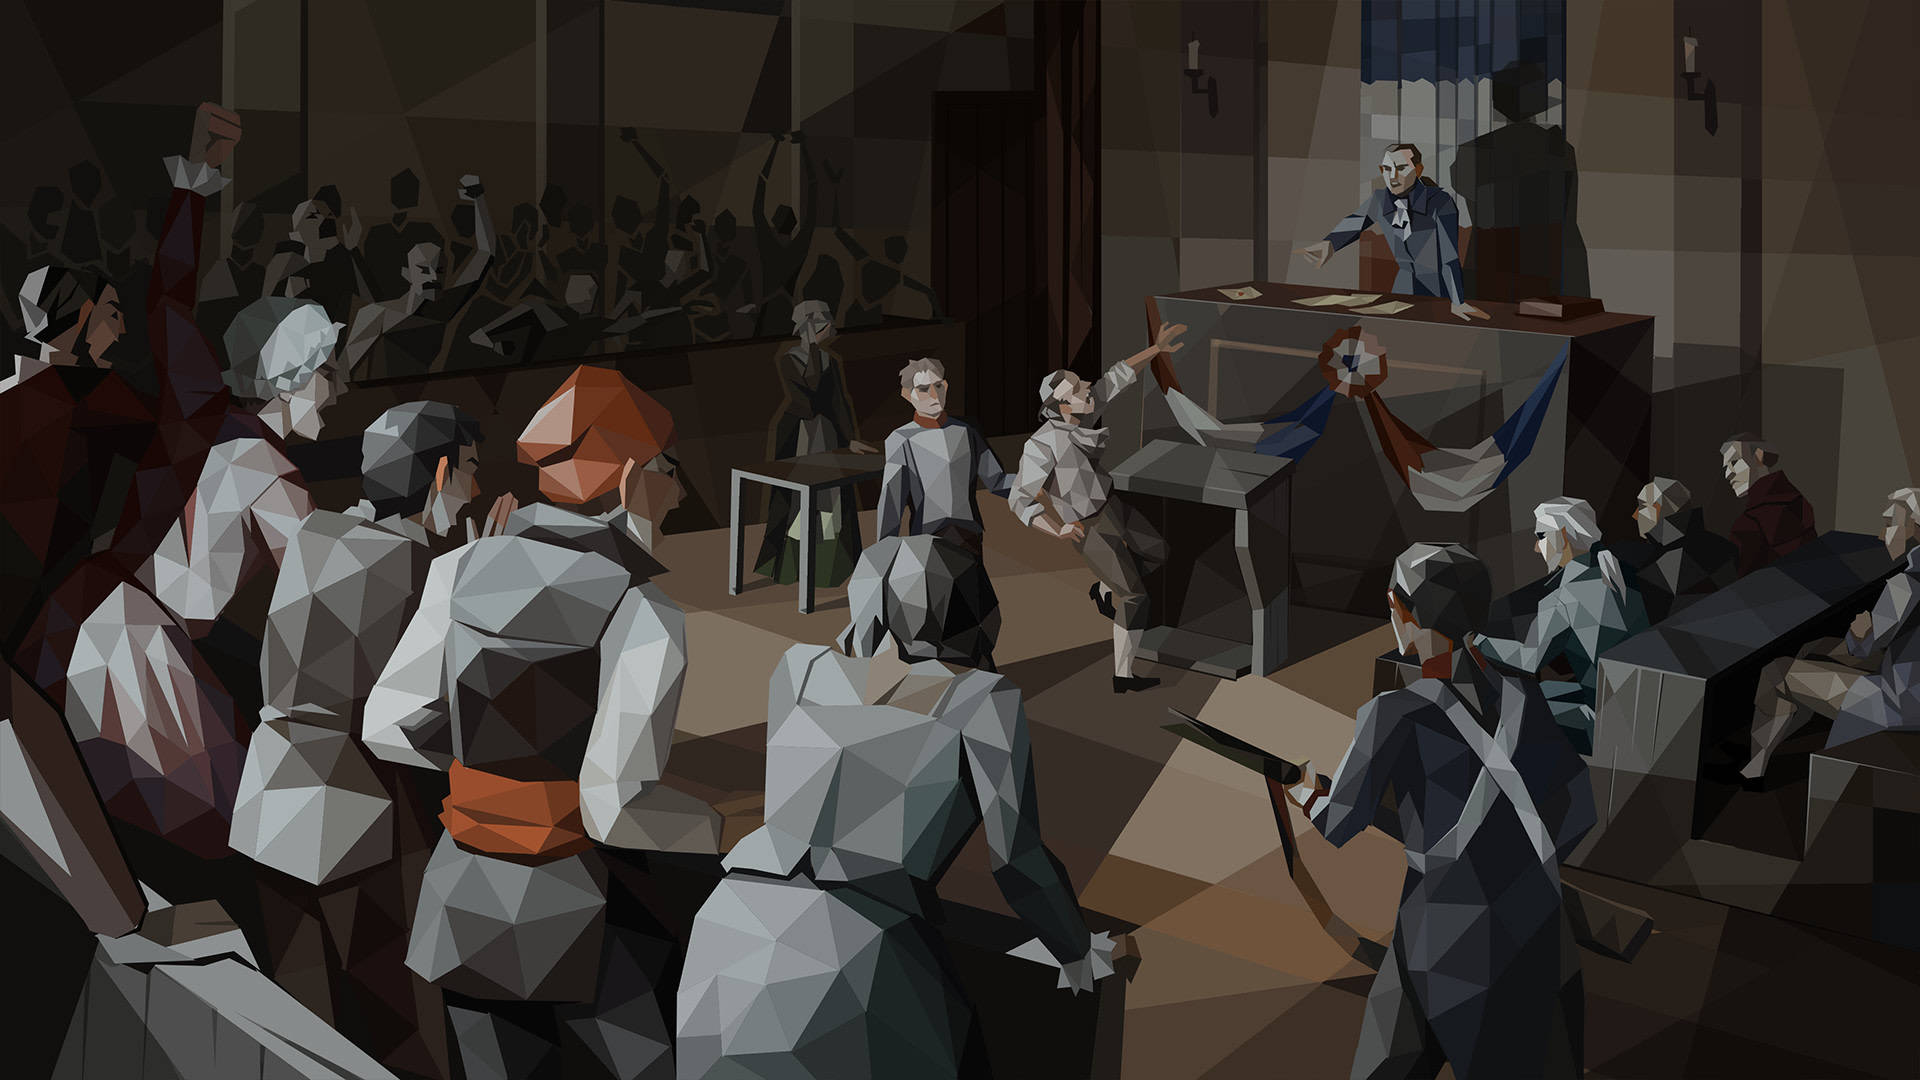 Heated court scene, shown in a kind of mosaic visual style.